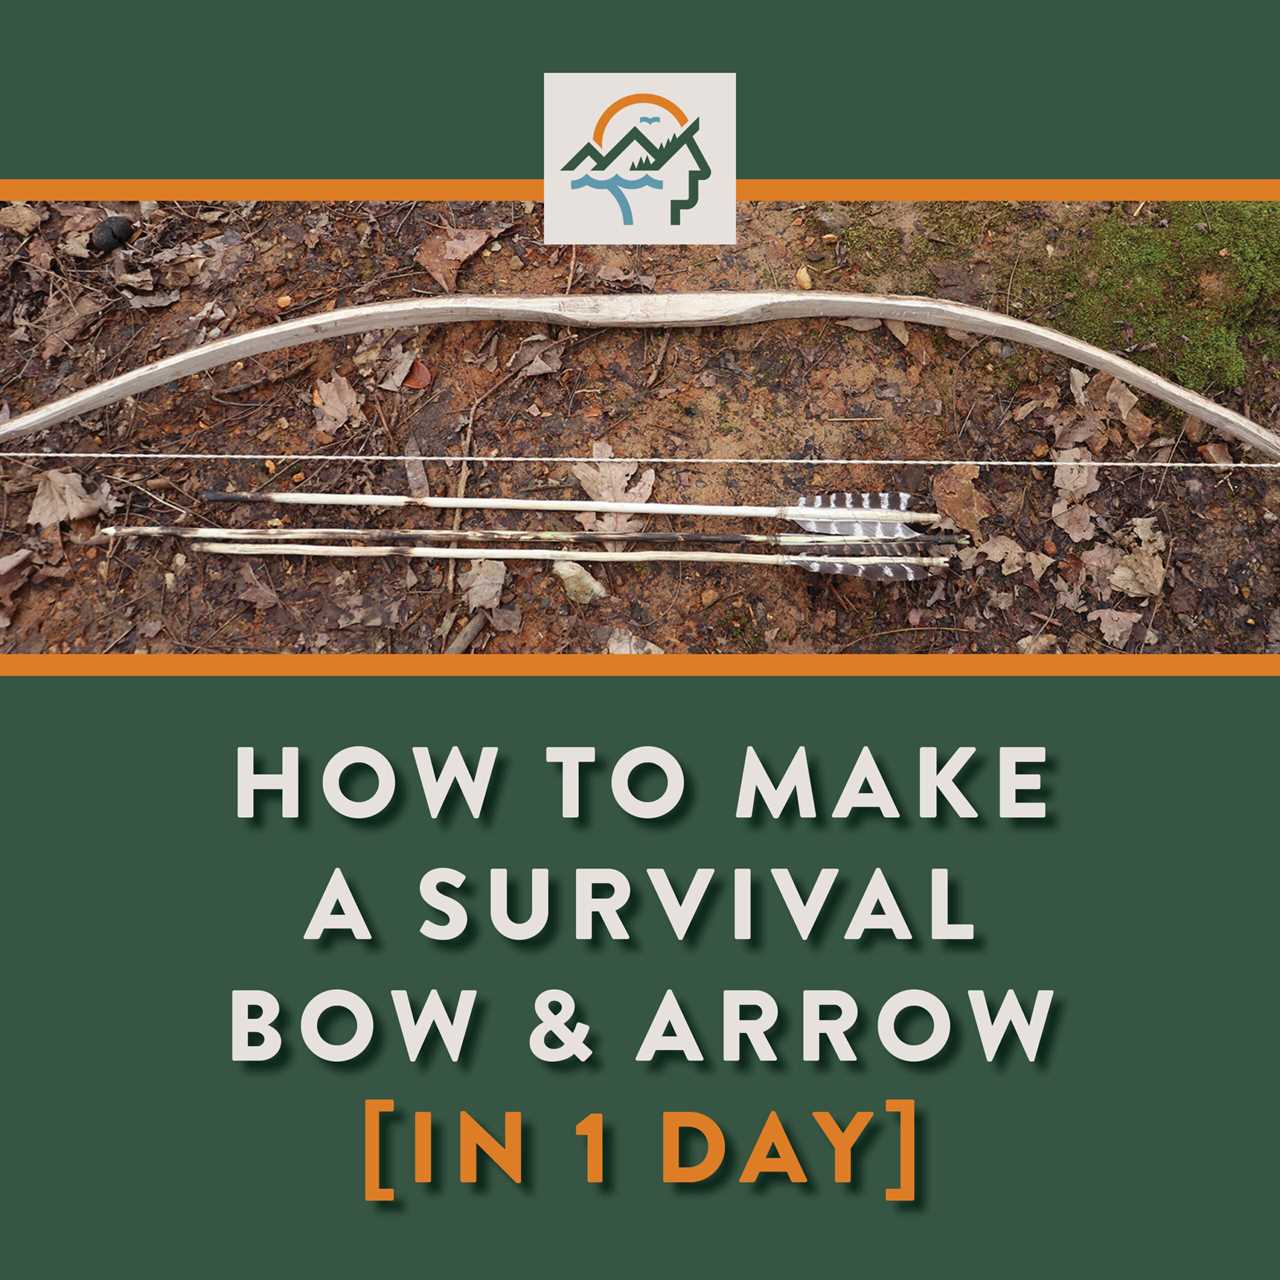 How to Make Improvised Arrowheads with Simple Tools for a Survival Bow & Arrow in Modern Times